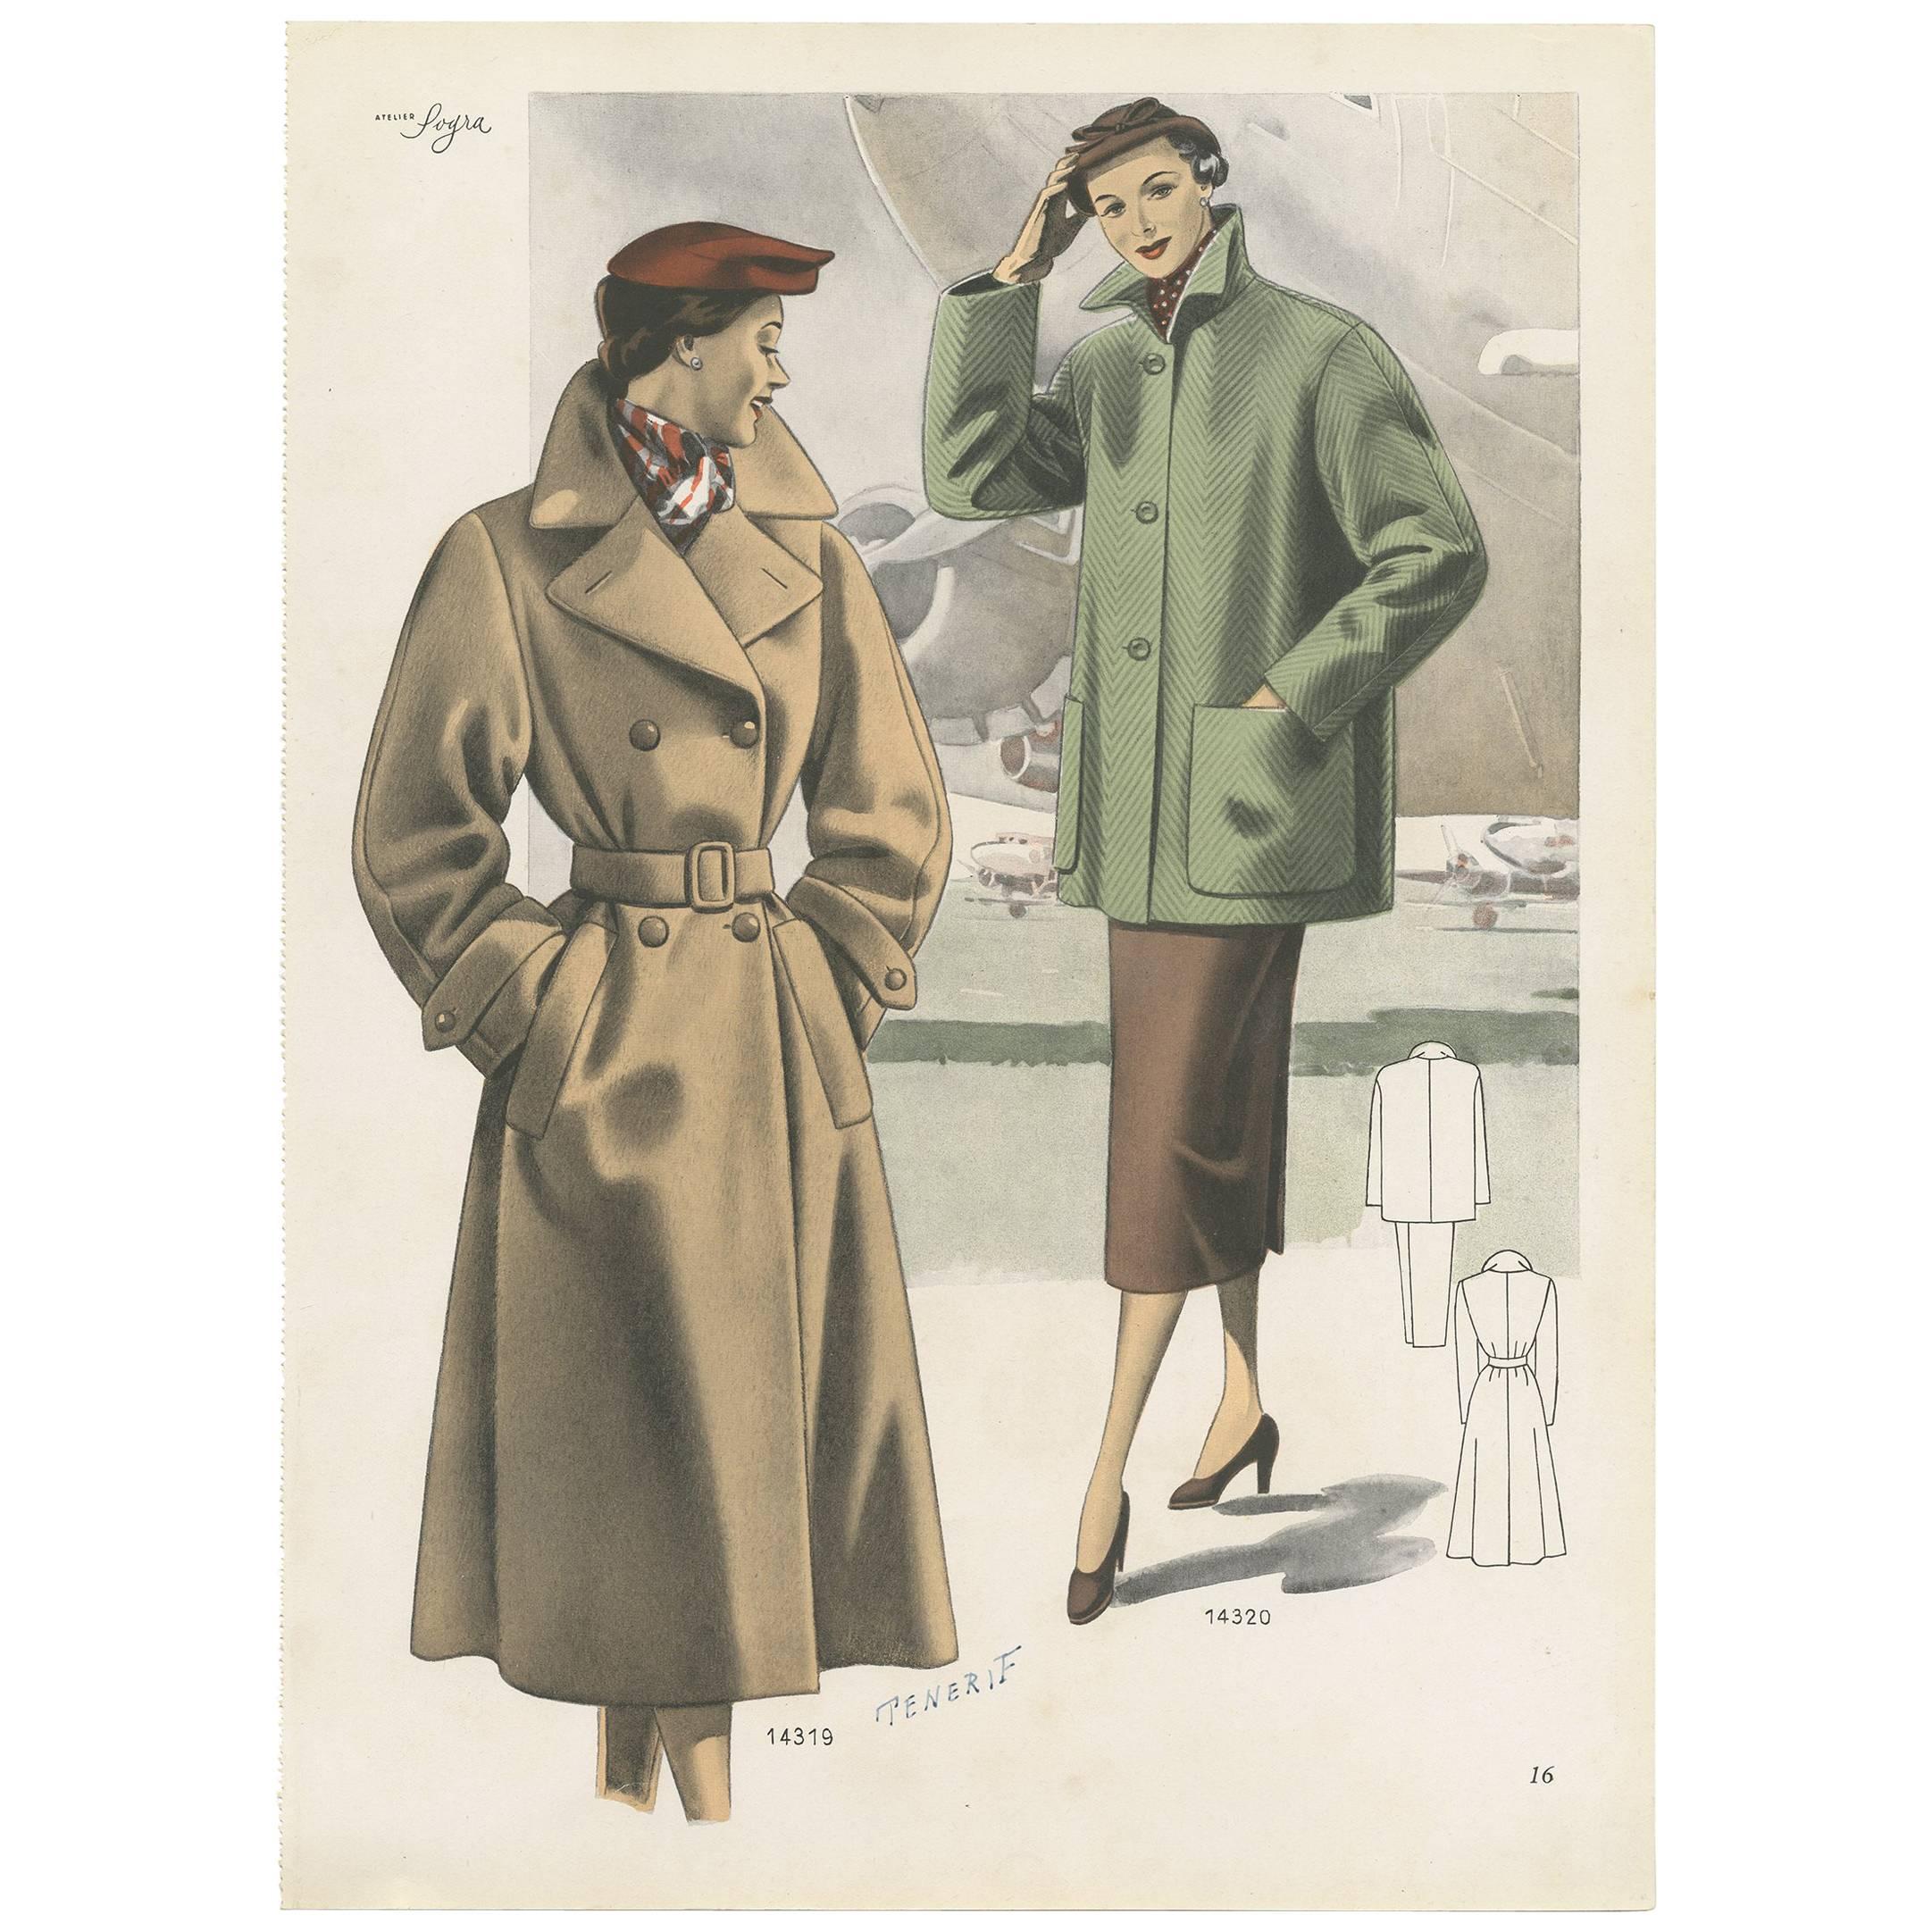 Vintage Fashion Print 'Pl.14319' Published in Ladies Styles, 1952